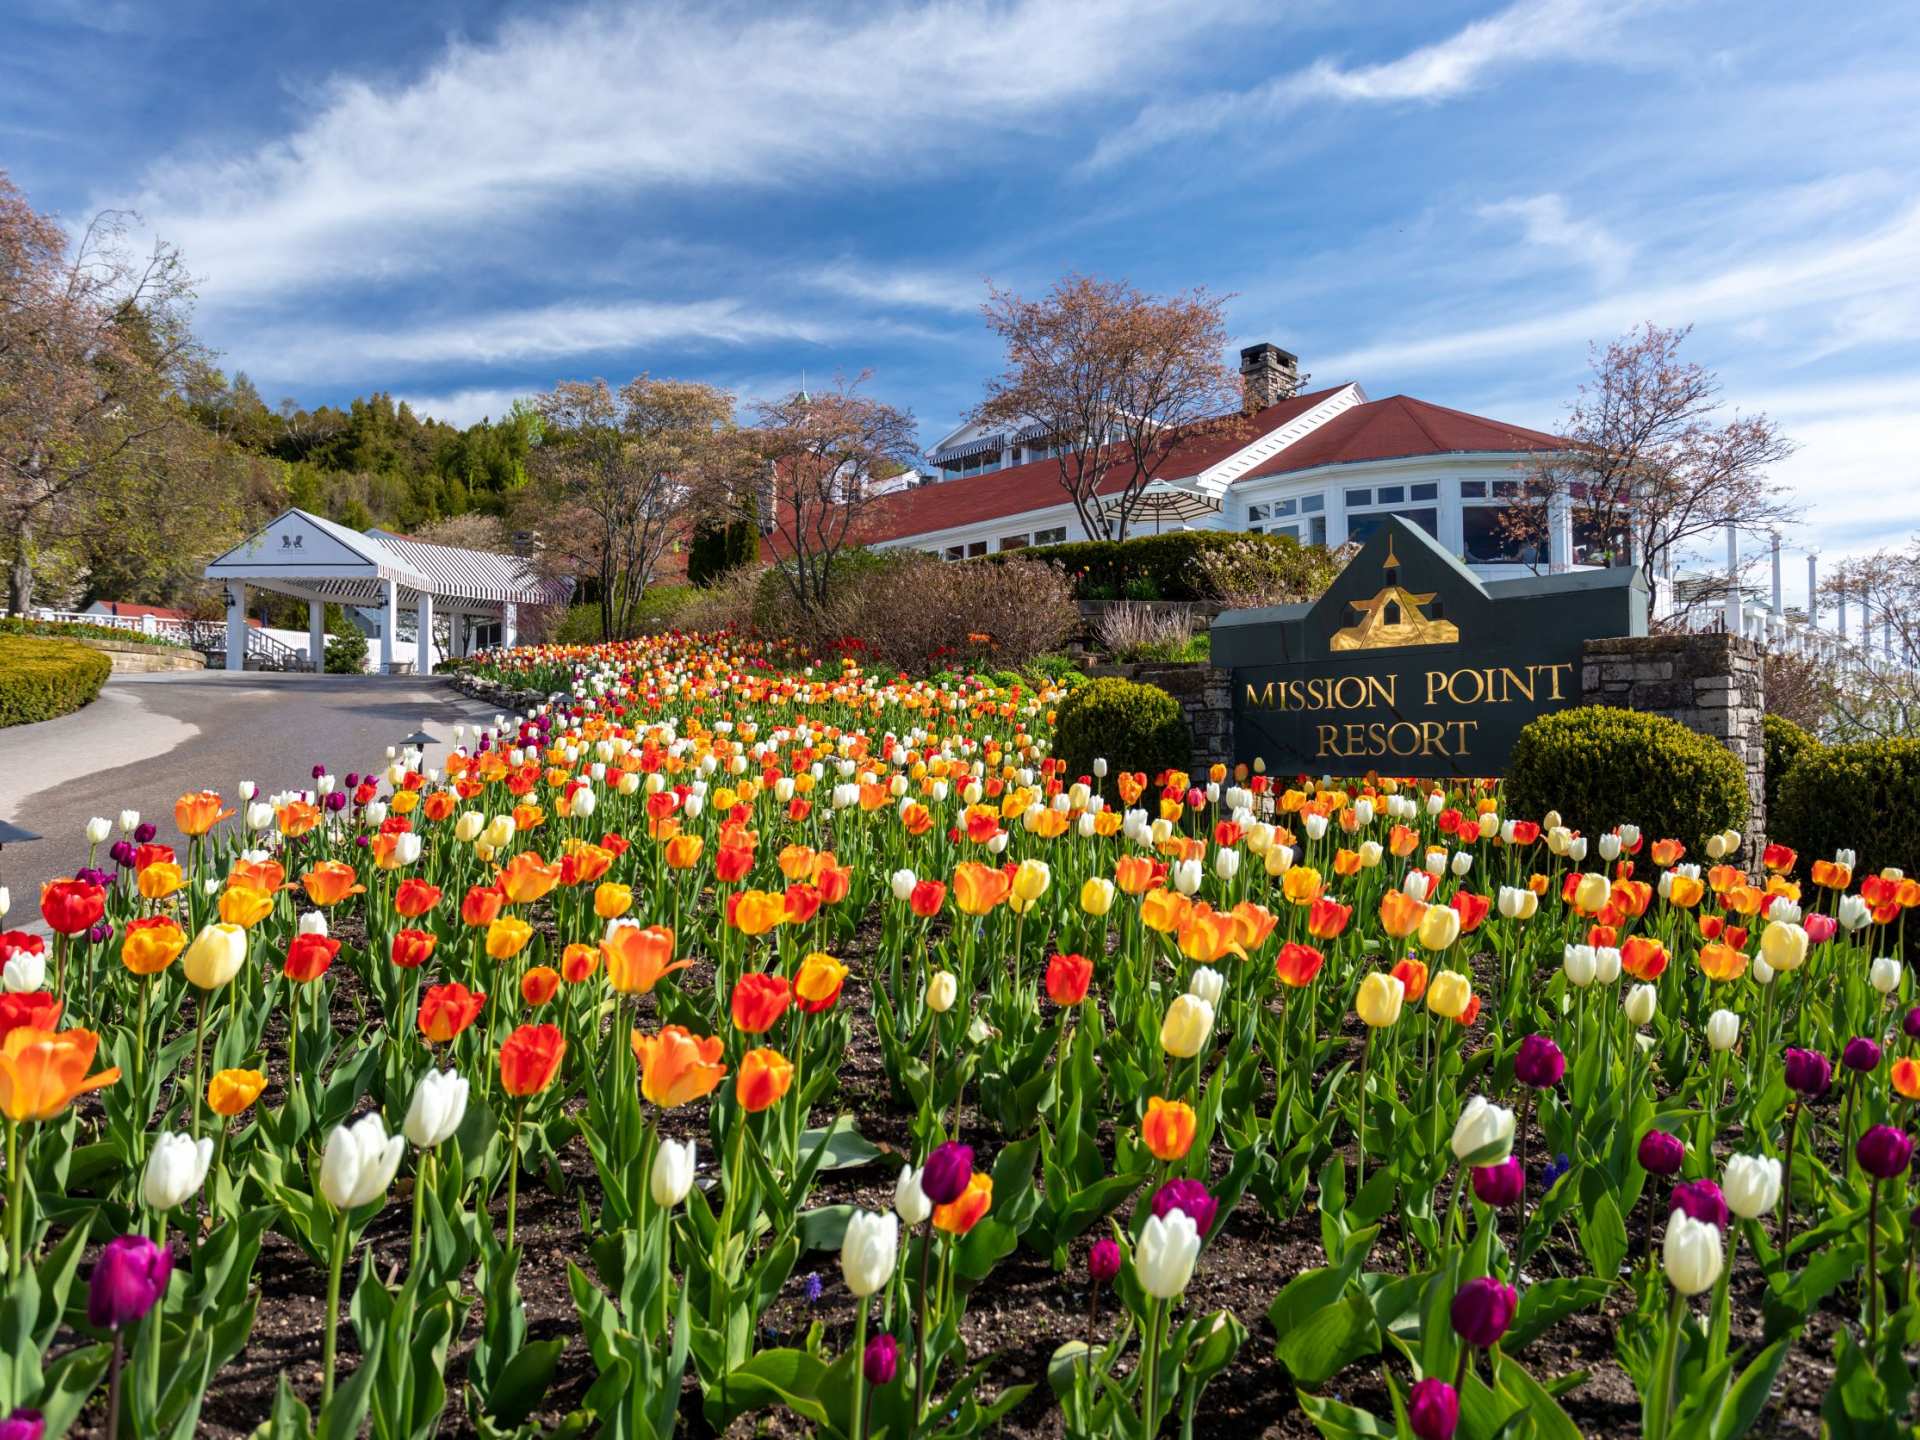 Mission Point resort | The tulips at Mission Point resort on Mackinac Island